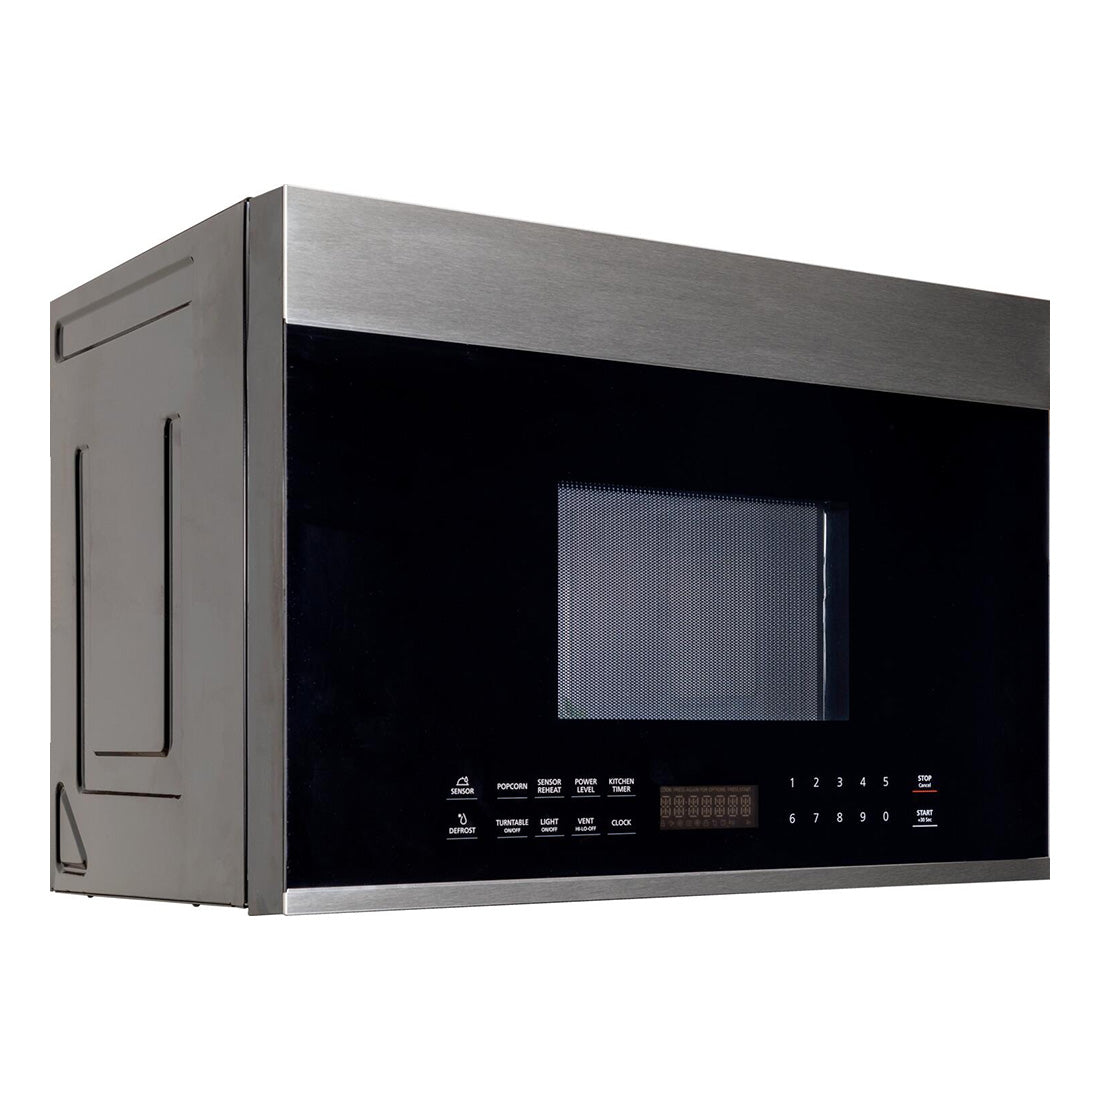 Forté 24 in. 1.3 cu. ft. Over the Range Microwave in Stainless Steel side.